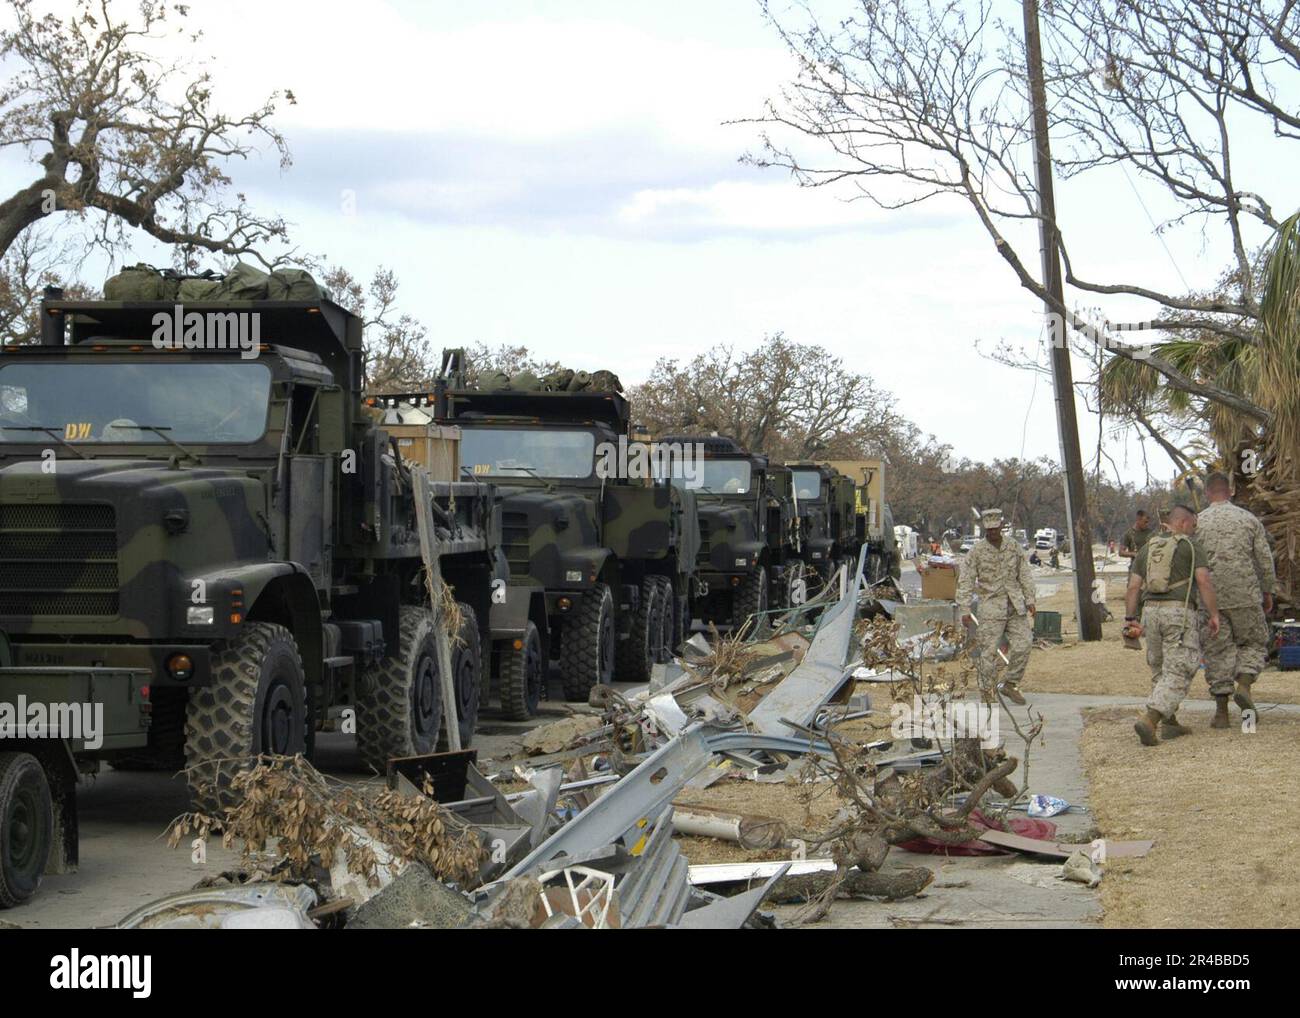 US Navy  U.S. Marines align multipurpose utility trucks on the sidewalk, loaded with basic life sustaining supplies and cleaning materials. Stock Photo